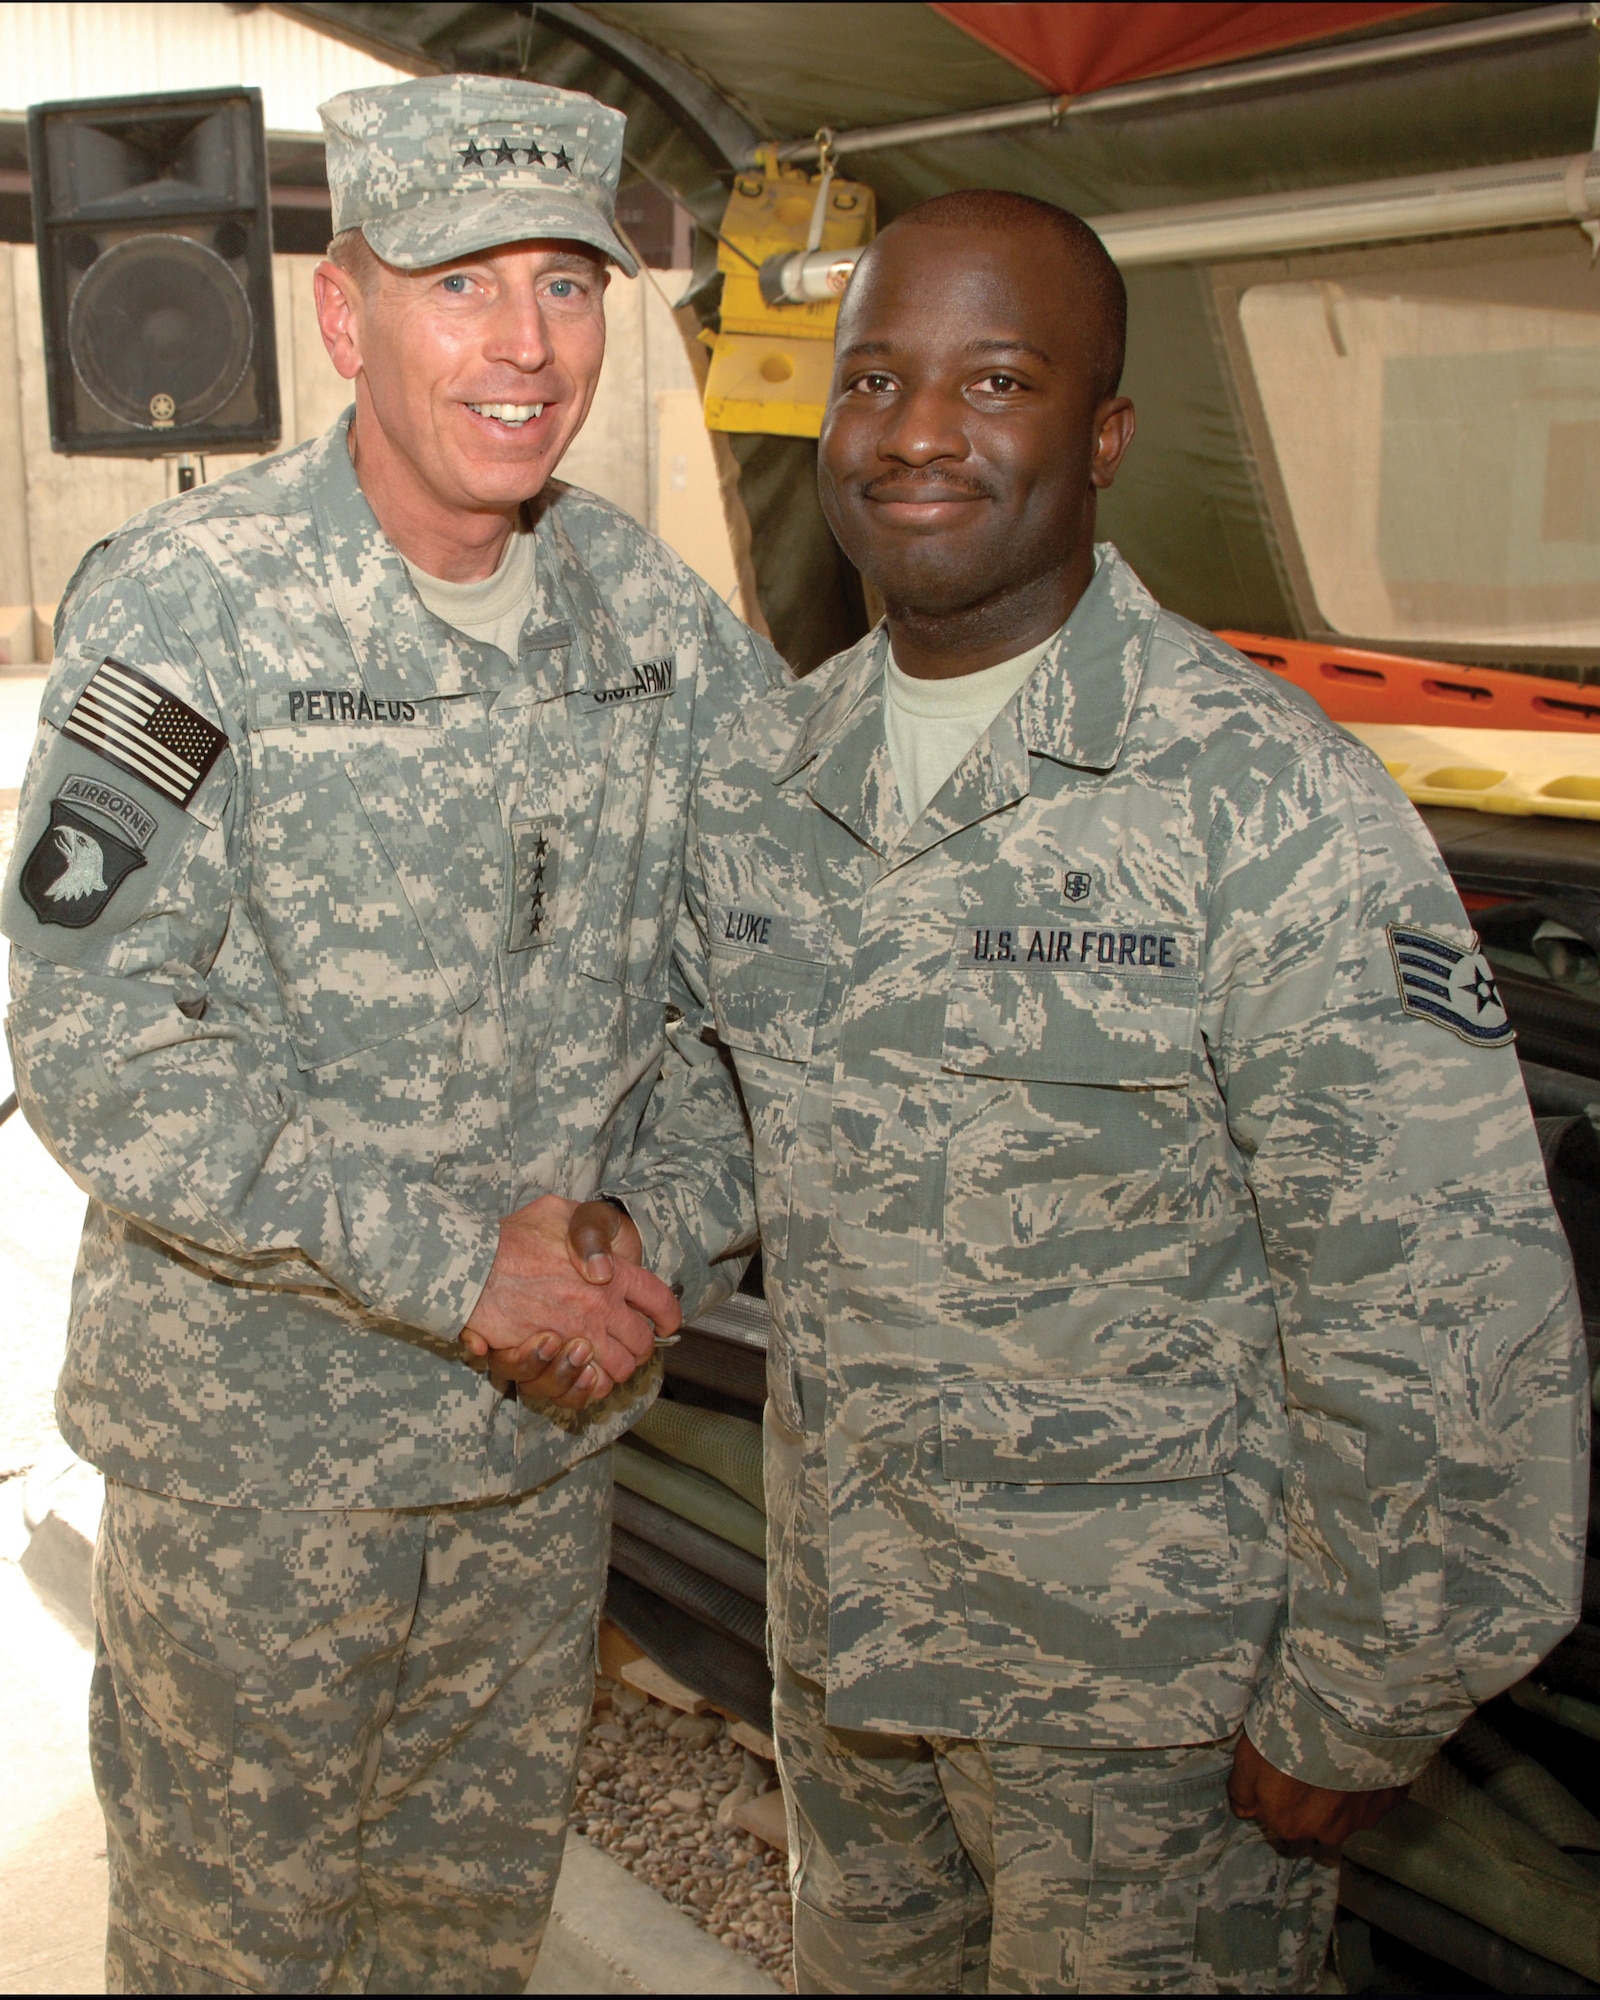 Army Gen. David Petraeus, then-commander Multinational Force Iraq, congratulates Staff Sgt. Otis Luke after presenting the medic with one of his commander's coins. The sergeant thwarted an escape attempt by a dangerous terrorist during a 120-day deployment to Joint Base Balad, Iraq from mid-May to late-September 2008.(U.S. Army Photo)